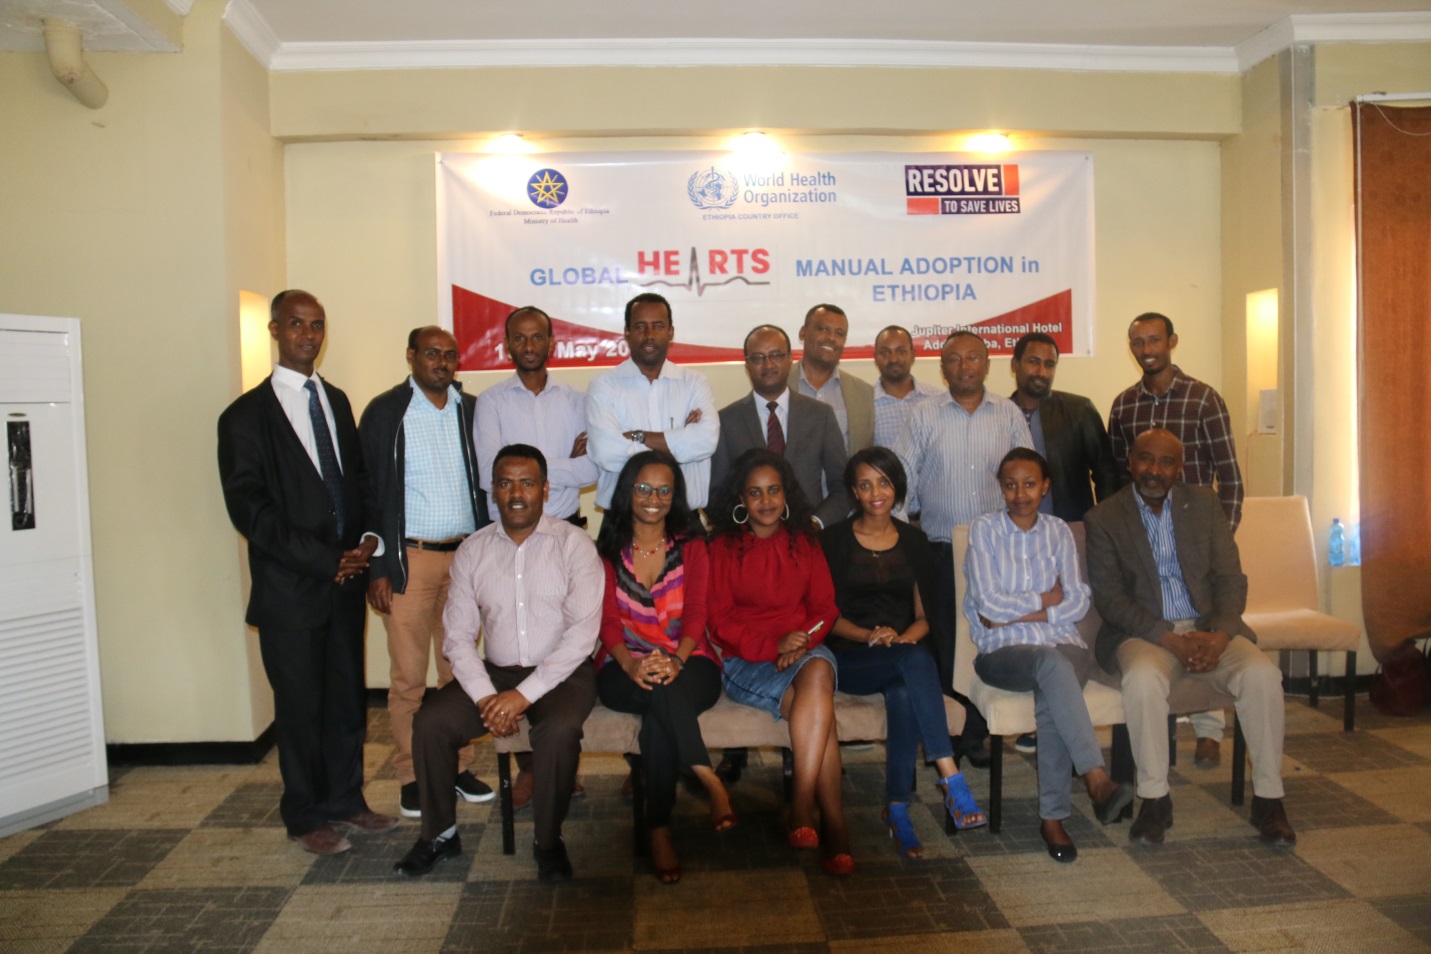 Global HEARTS’ Manual Adoption workshop Participants in Addis Ababa